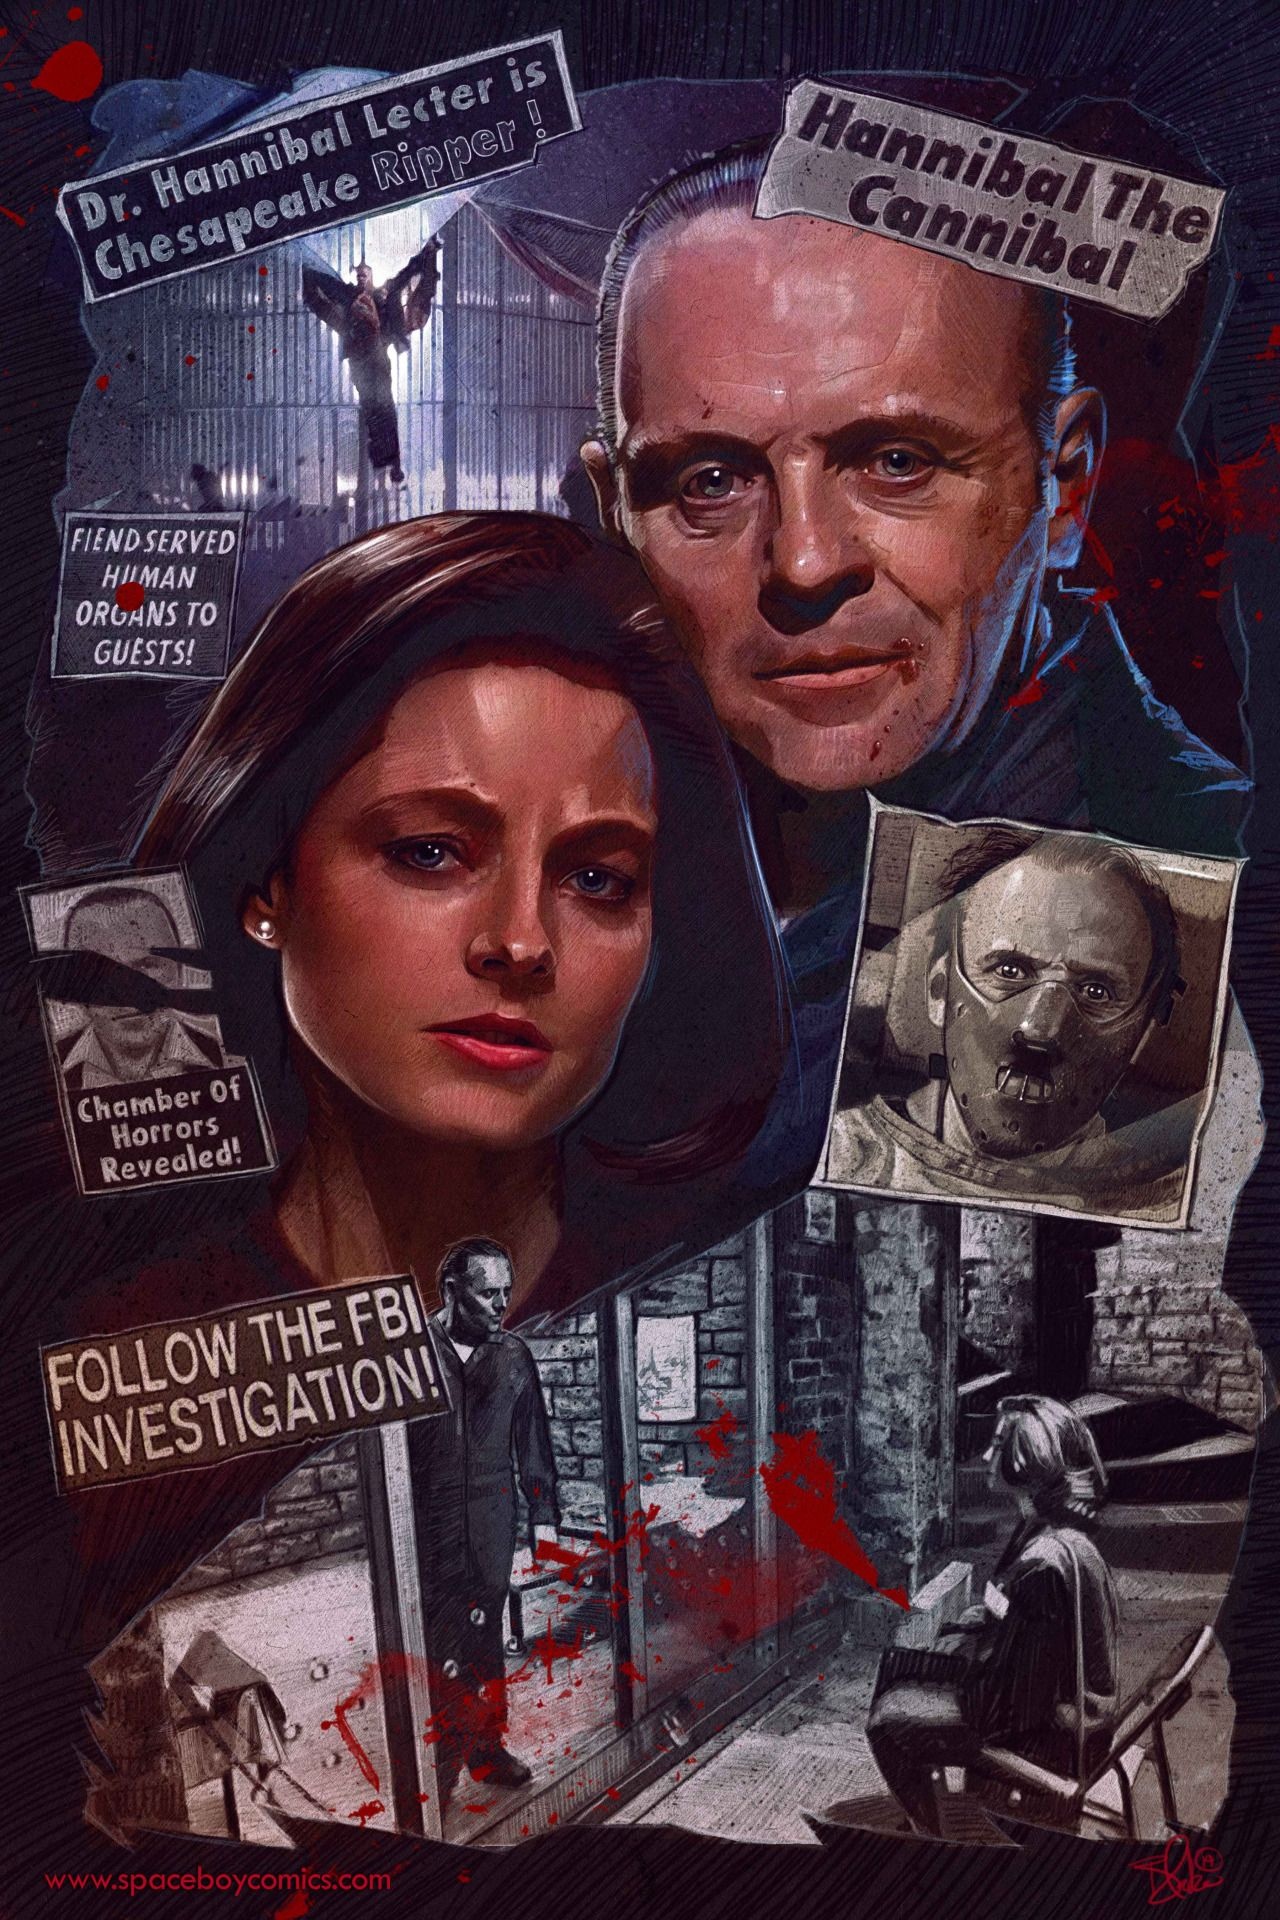 Silence of the Lambs Tumblr, Hannibal movie fandom, Scary movie obsession, Dark and thrilling, 1280x1920 HD Handy